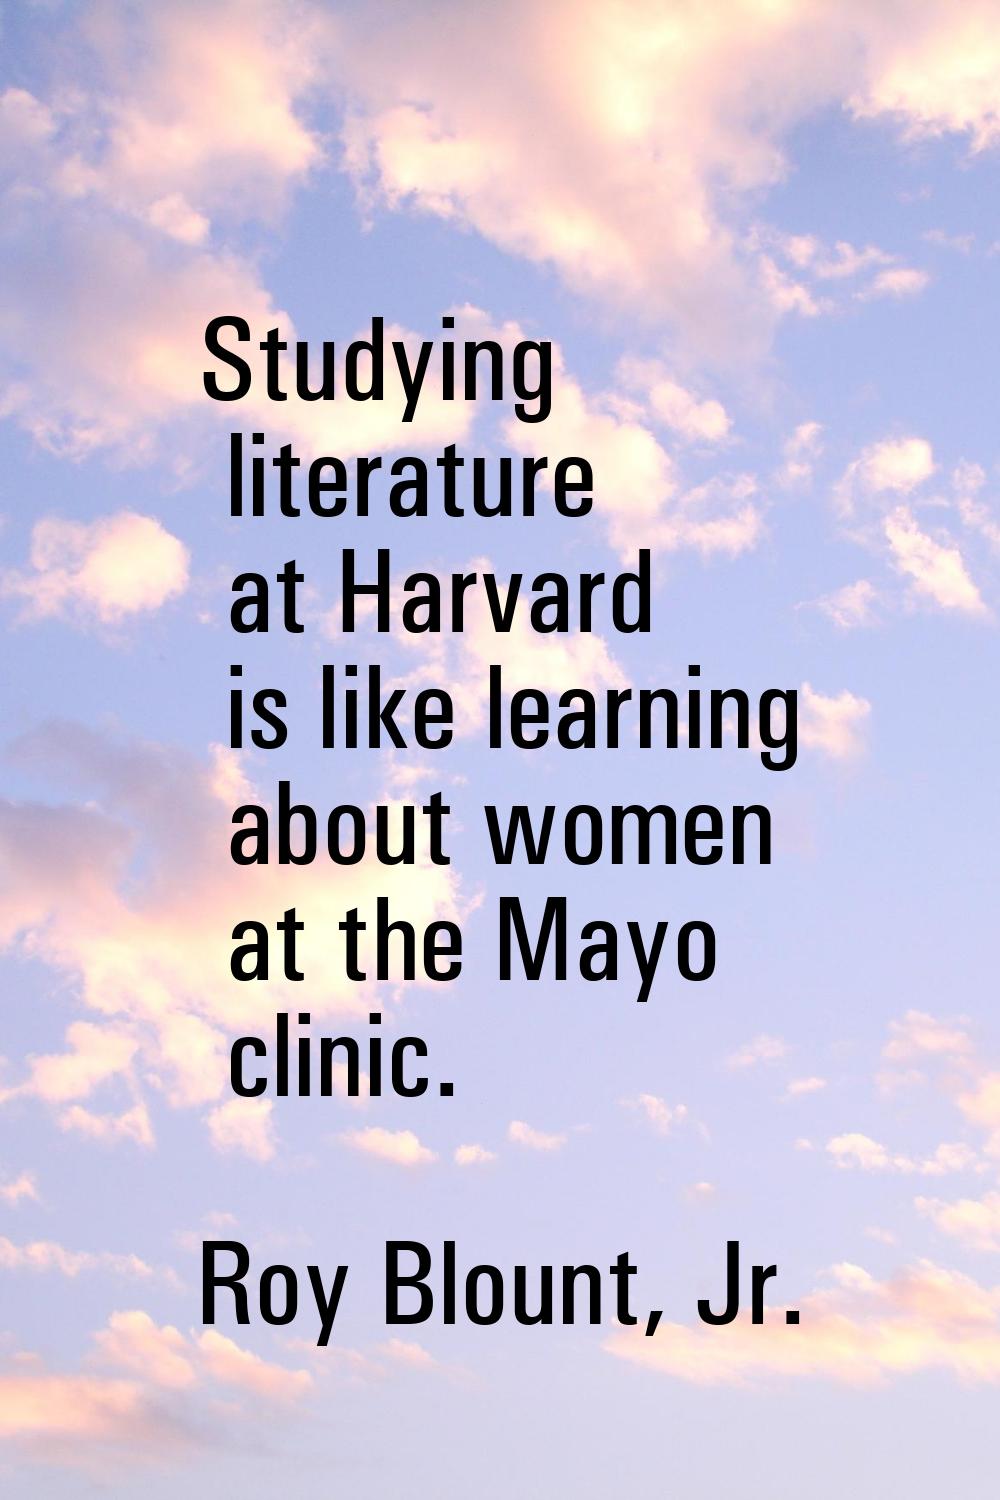 Studying literature at Harvard is like learning about women at the Mayo clinic.